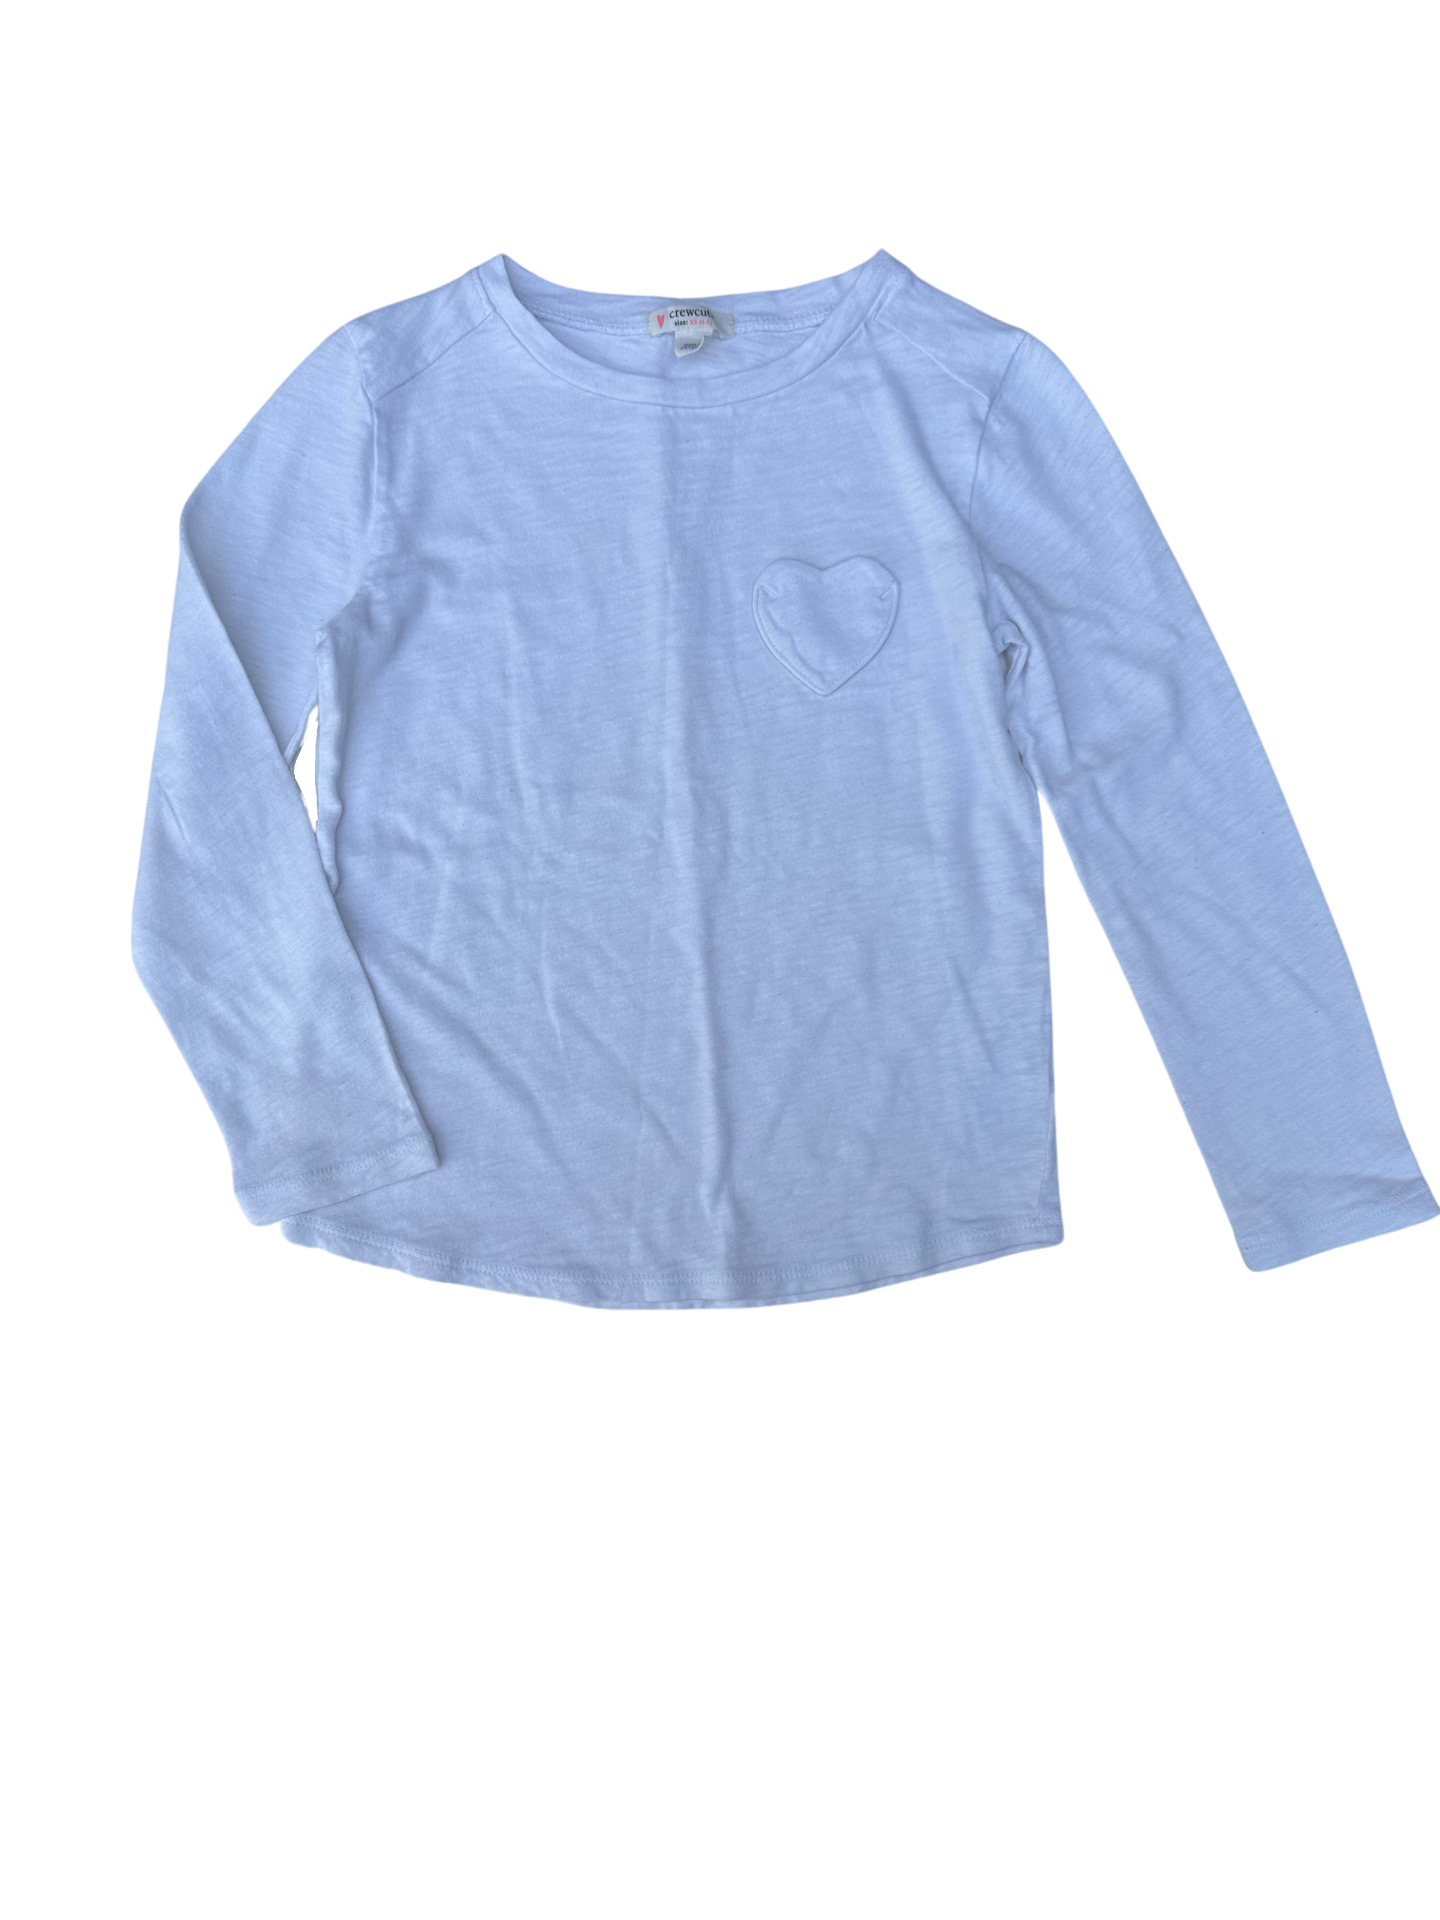 Crewcuts white long sleeve tee with heart pocket (size 4-5yrs)